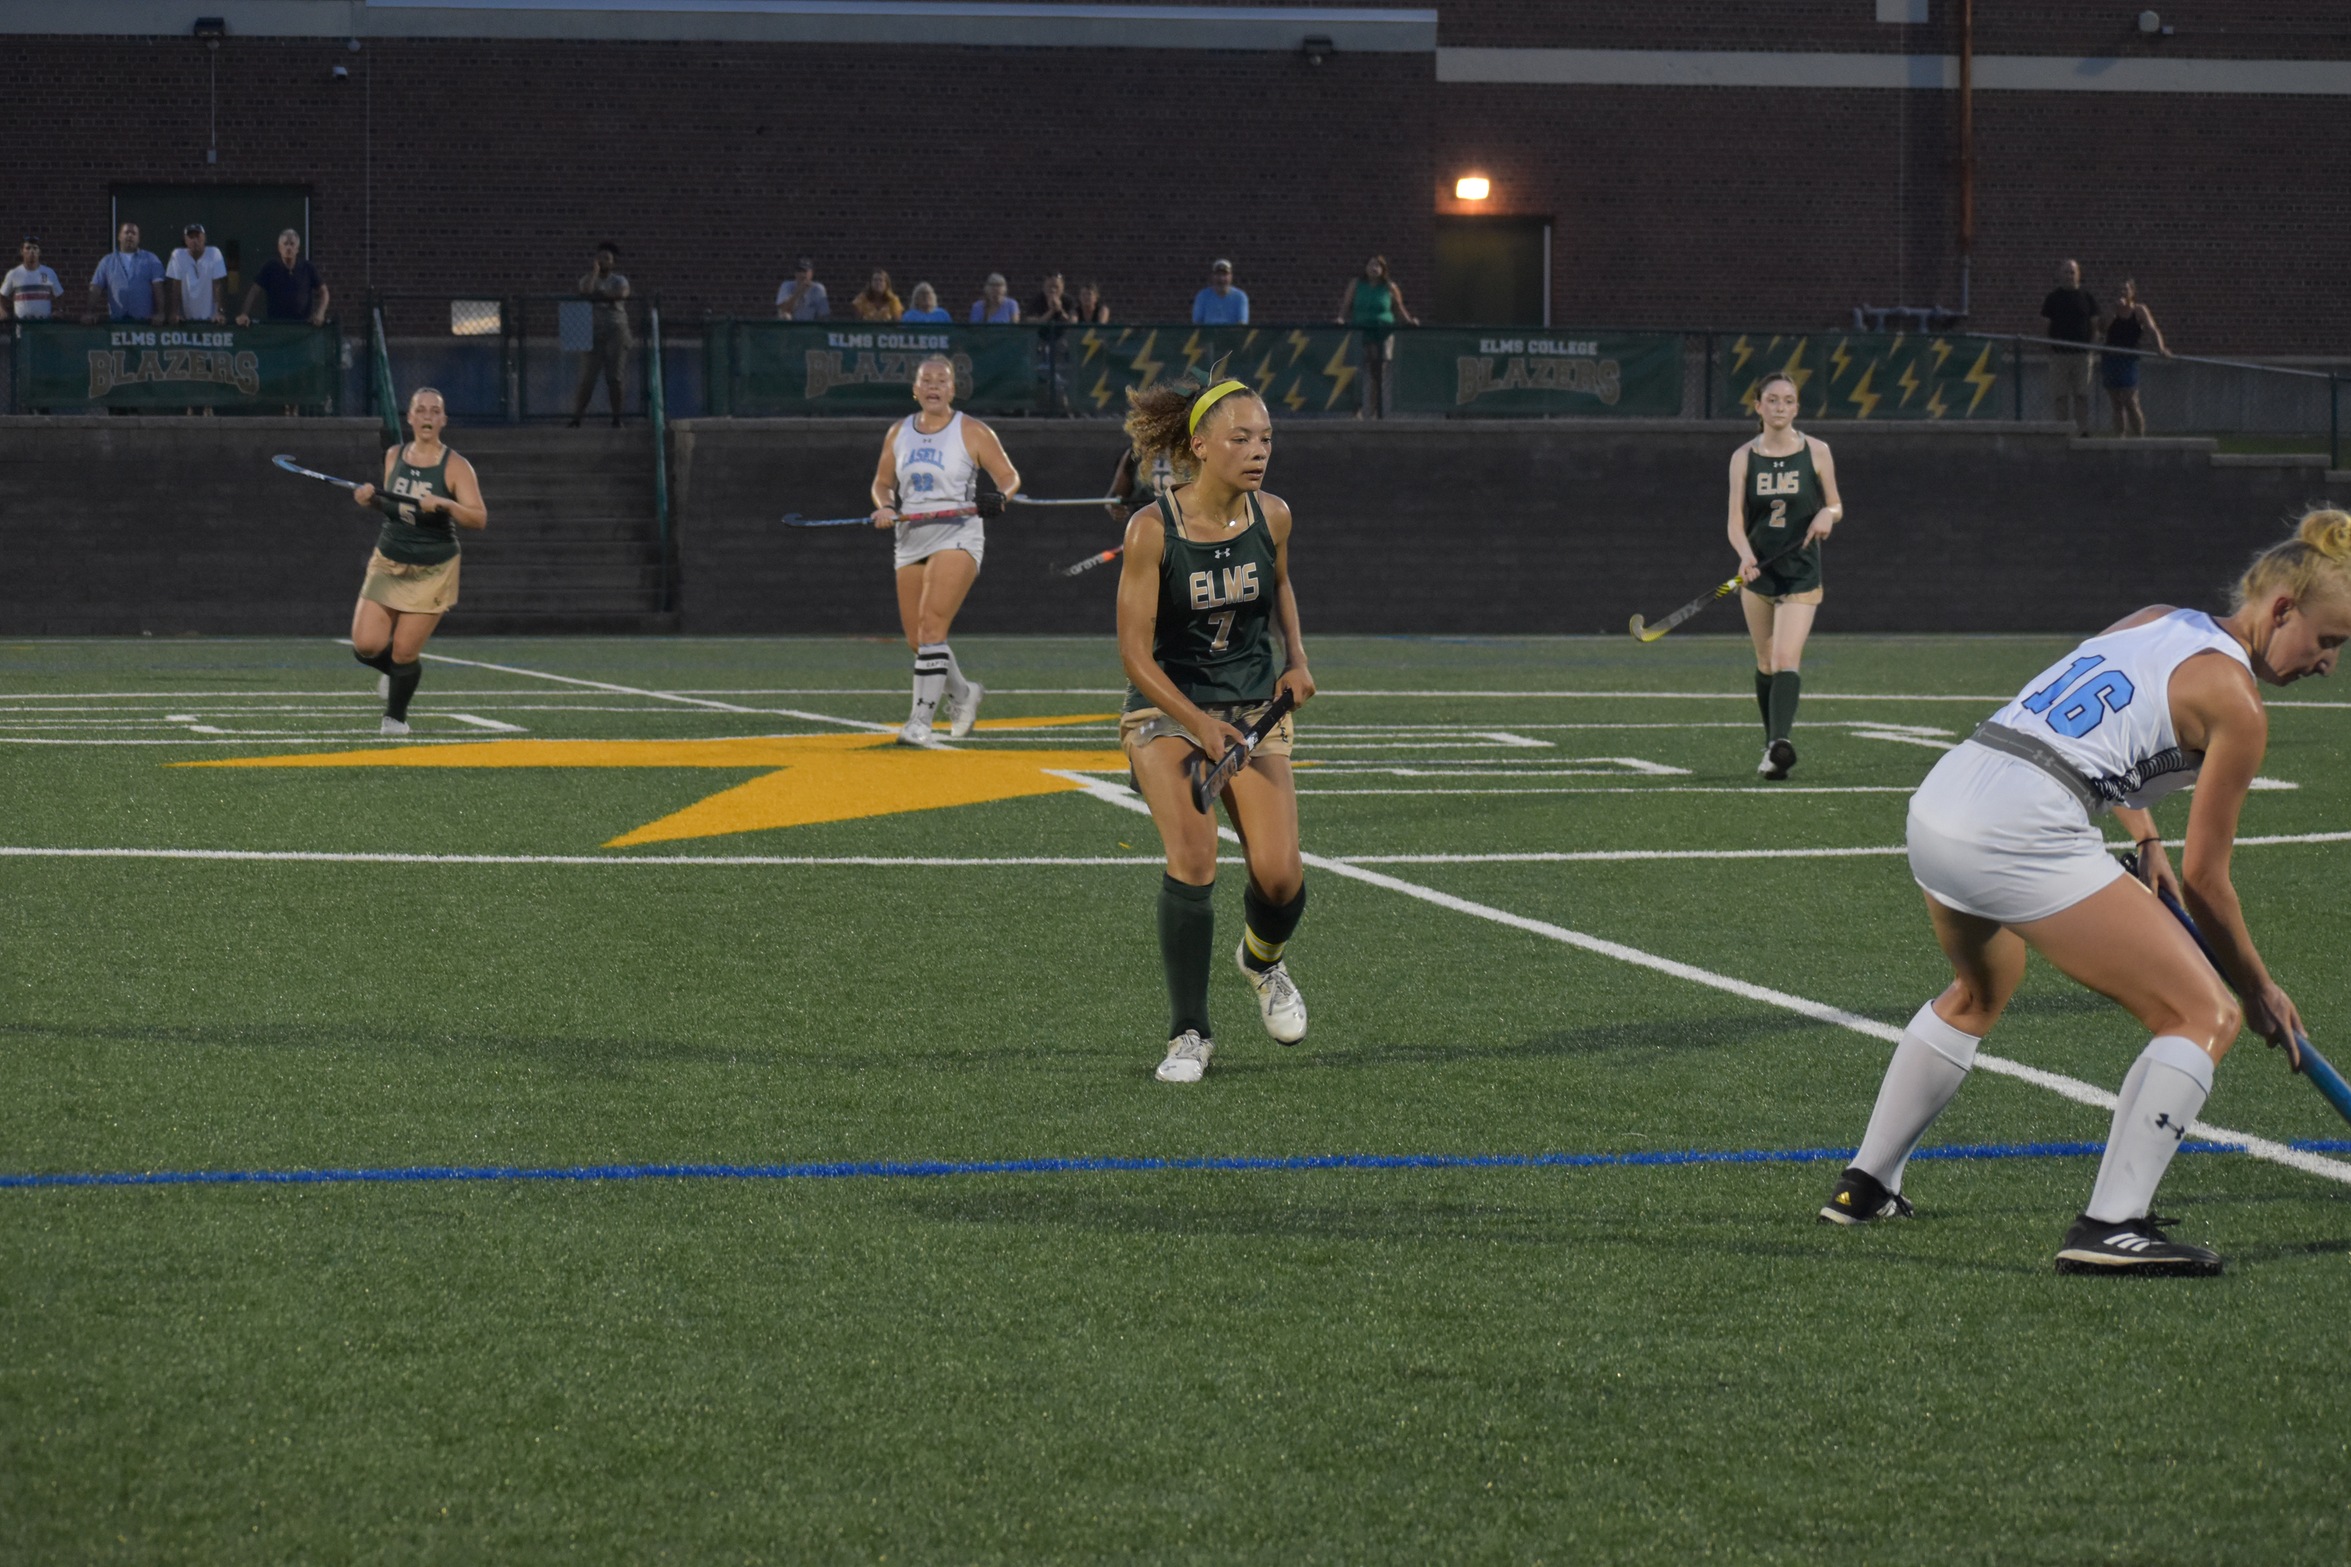 Blazers Knocked Down by Bison, 5-0 Final